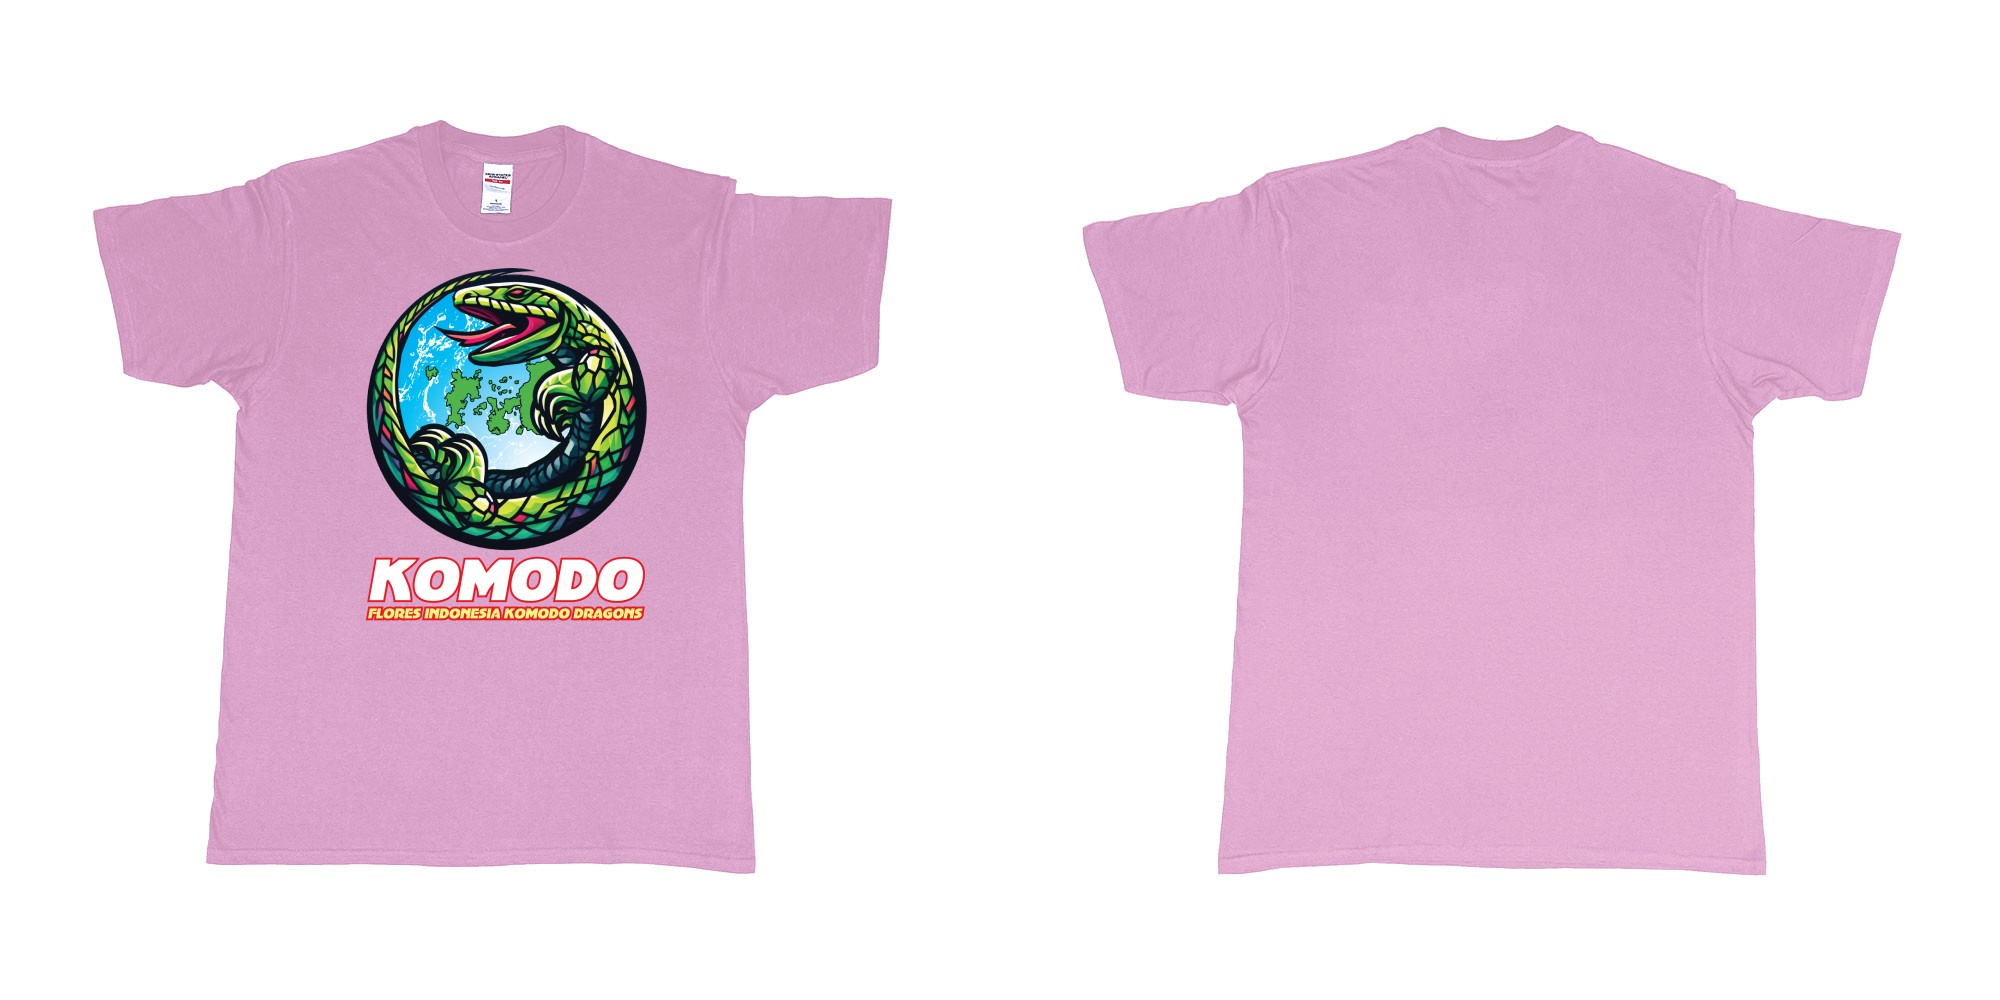 Custom tshirt design flores indonesia komodo dragons cirkle islands in fabric color light-pink choice your own text made in Bali by The Pirate Way